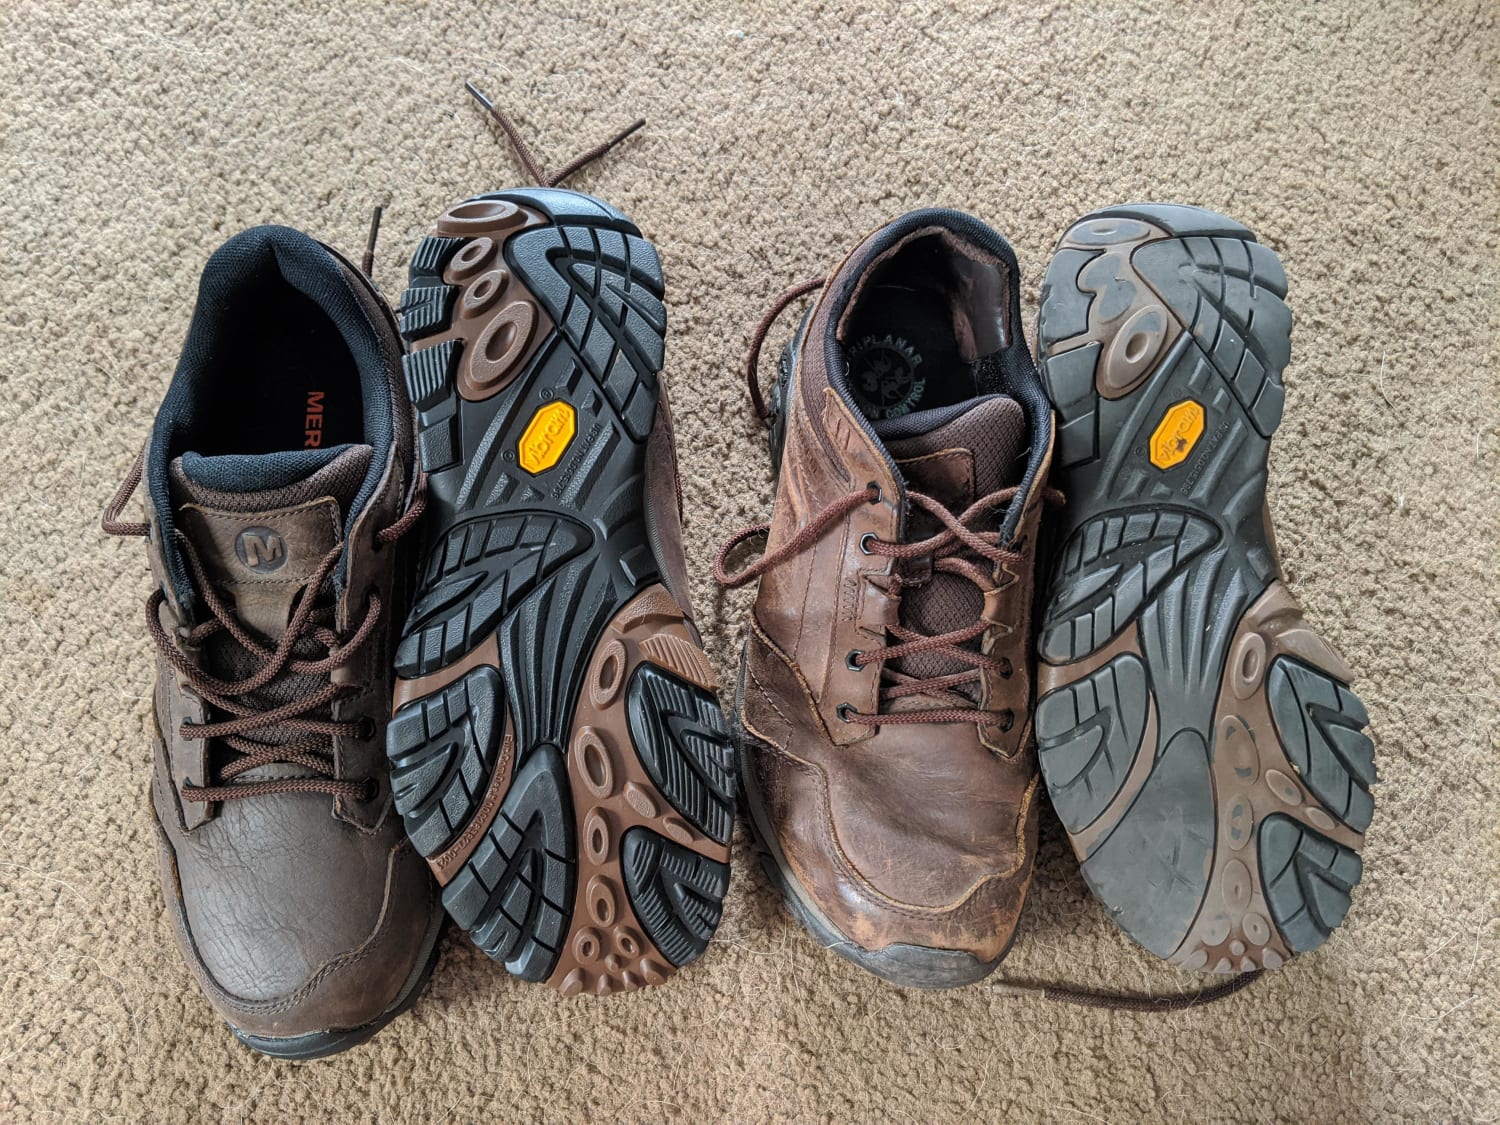 What four years of hard use will do to a pair of Merrell MOAB Adventure. Old pair are still comfortable and work well, but I like new and shiny